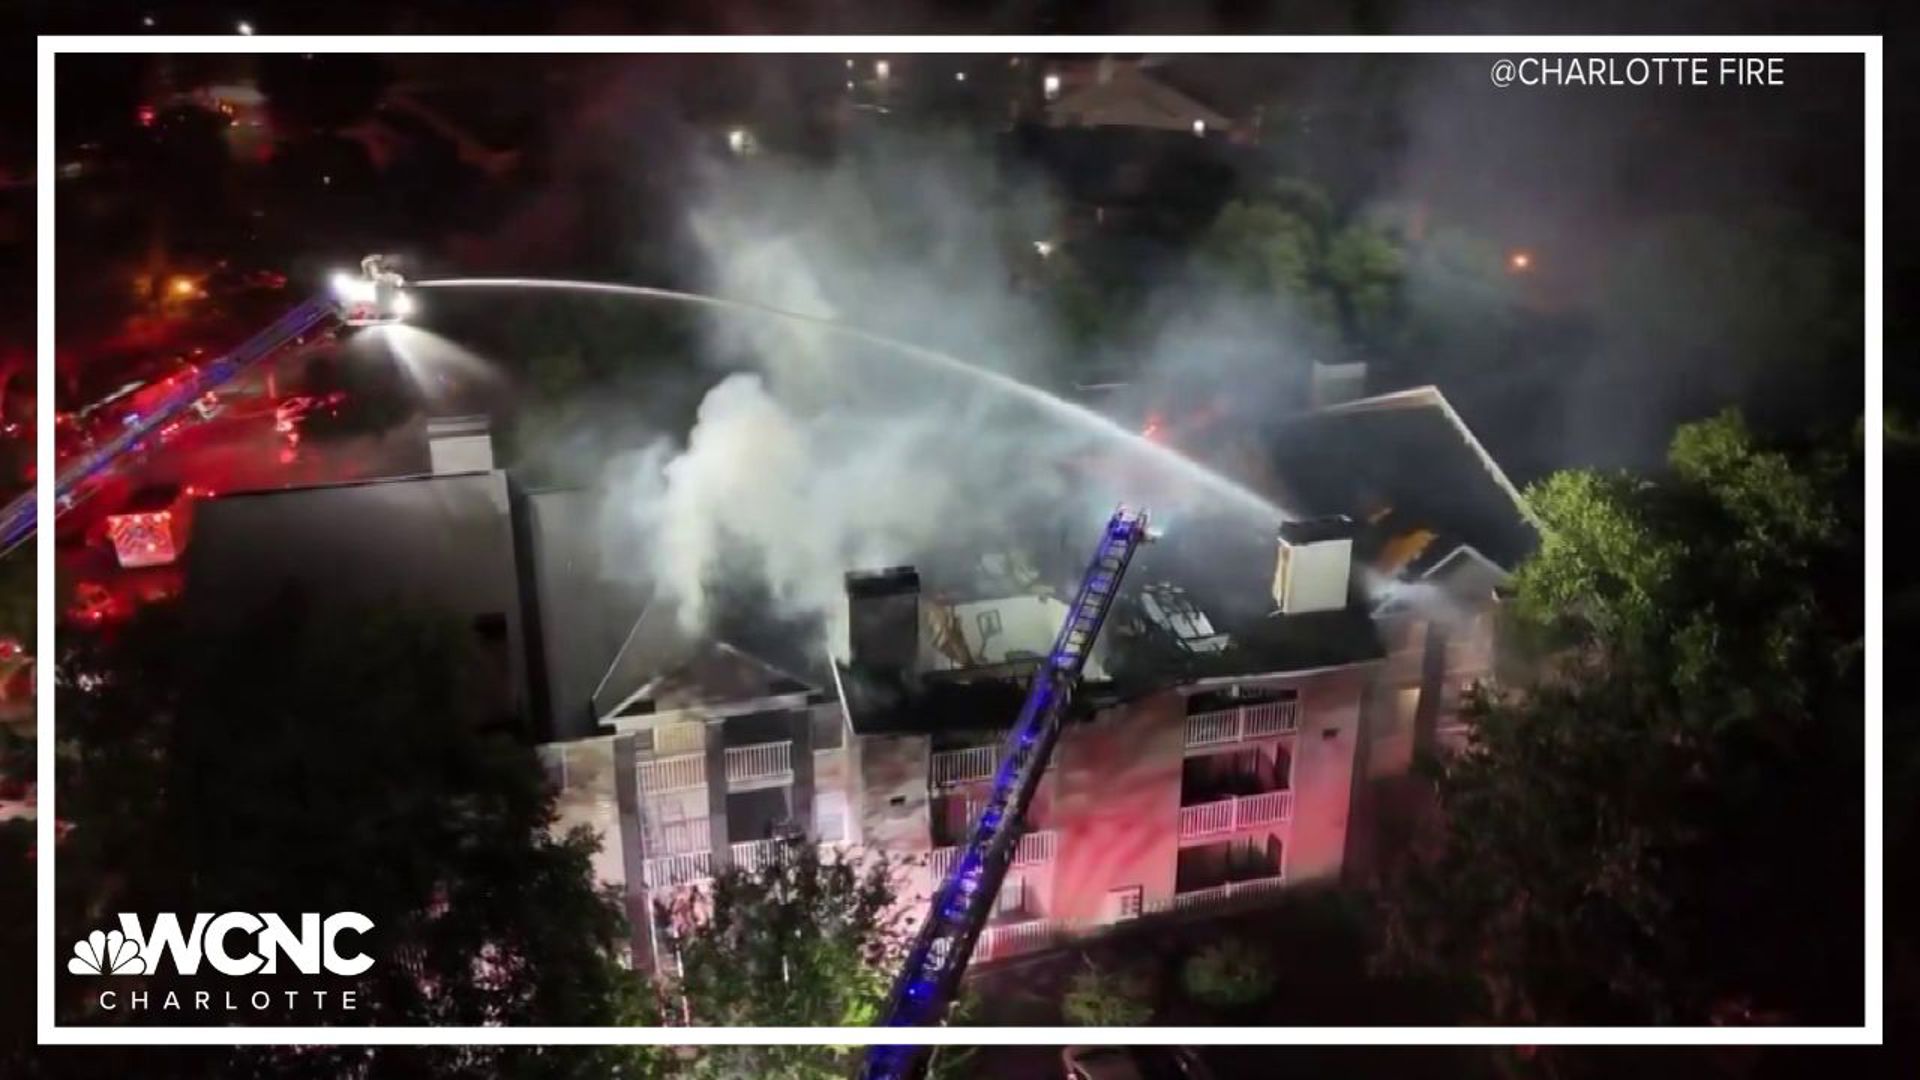 Investigators said an unattended candle caused a massive fire that destroyed an apartment building in southwest Charlotte early Friday morning.